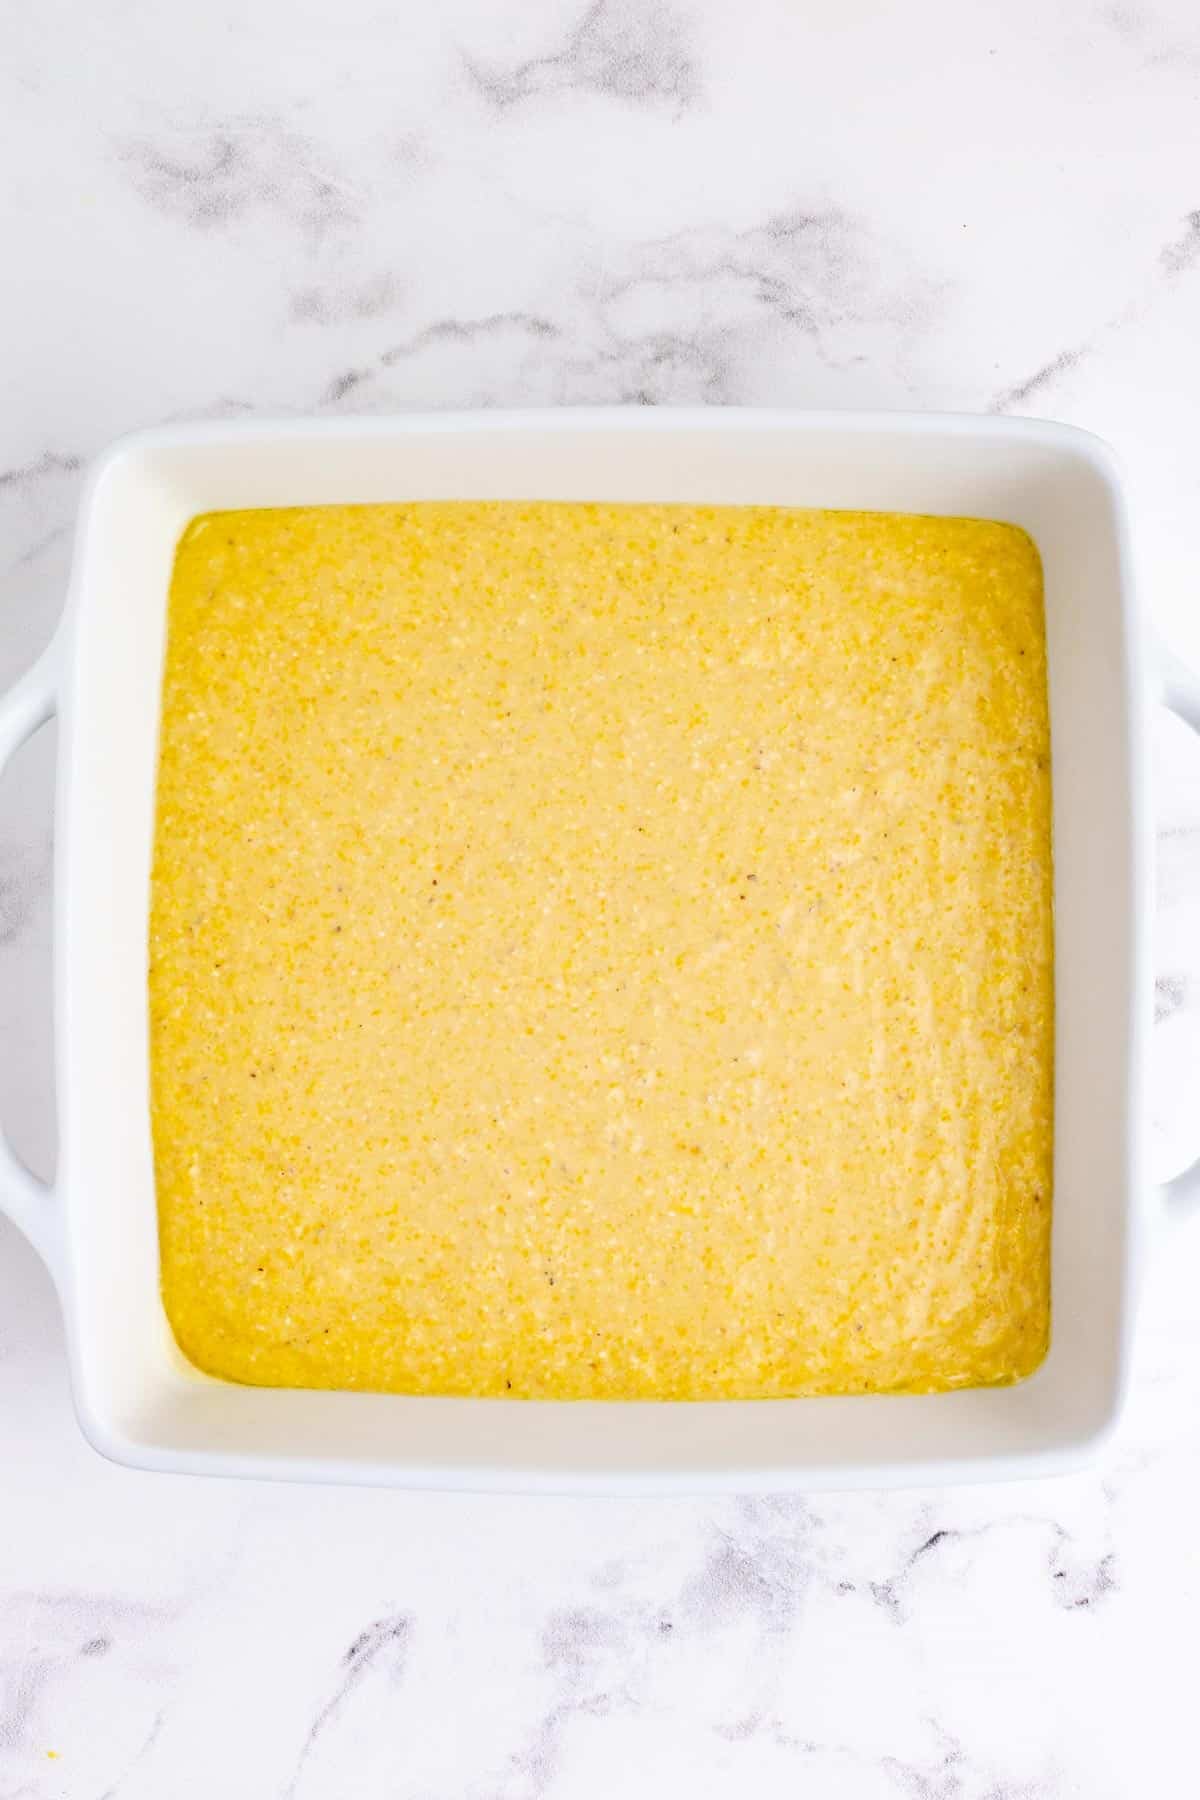 Cornbread batter is poured into a baking dish.